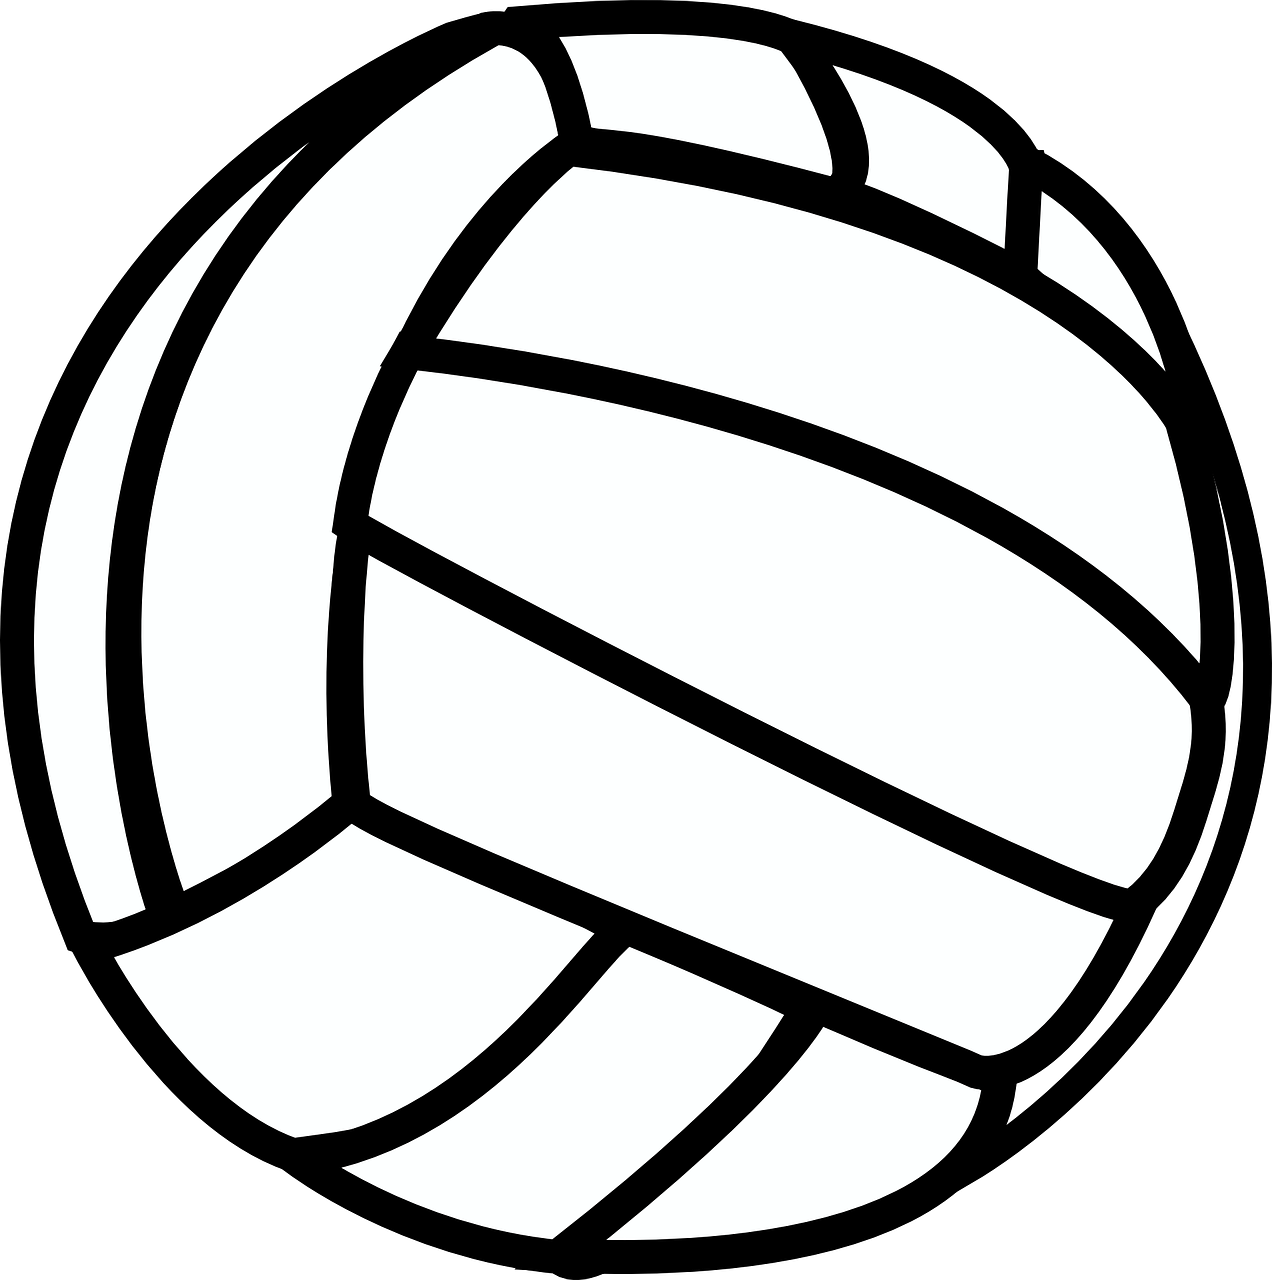 Download Free Photo Of Volleyball Sport Black White Free Vector Graphics From Needpix Com